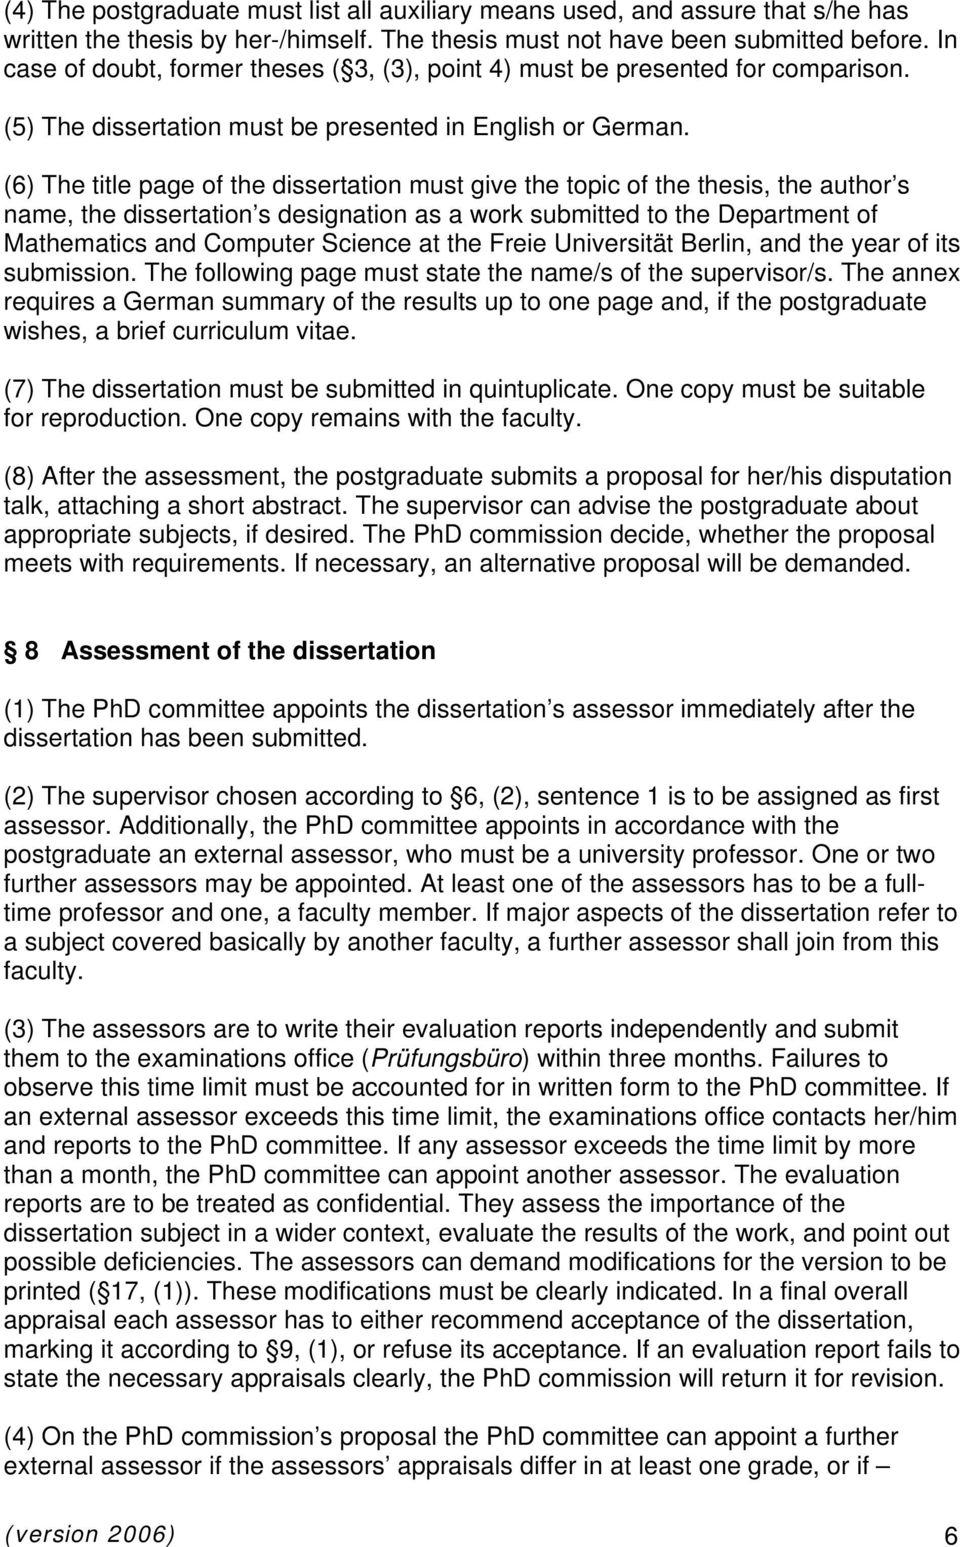 (6) The title page of the dissertation must give the topic of the thesis, the author s name, the dissertation s designation as a work submitted to the Department of Mathematics and Computer Science